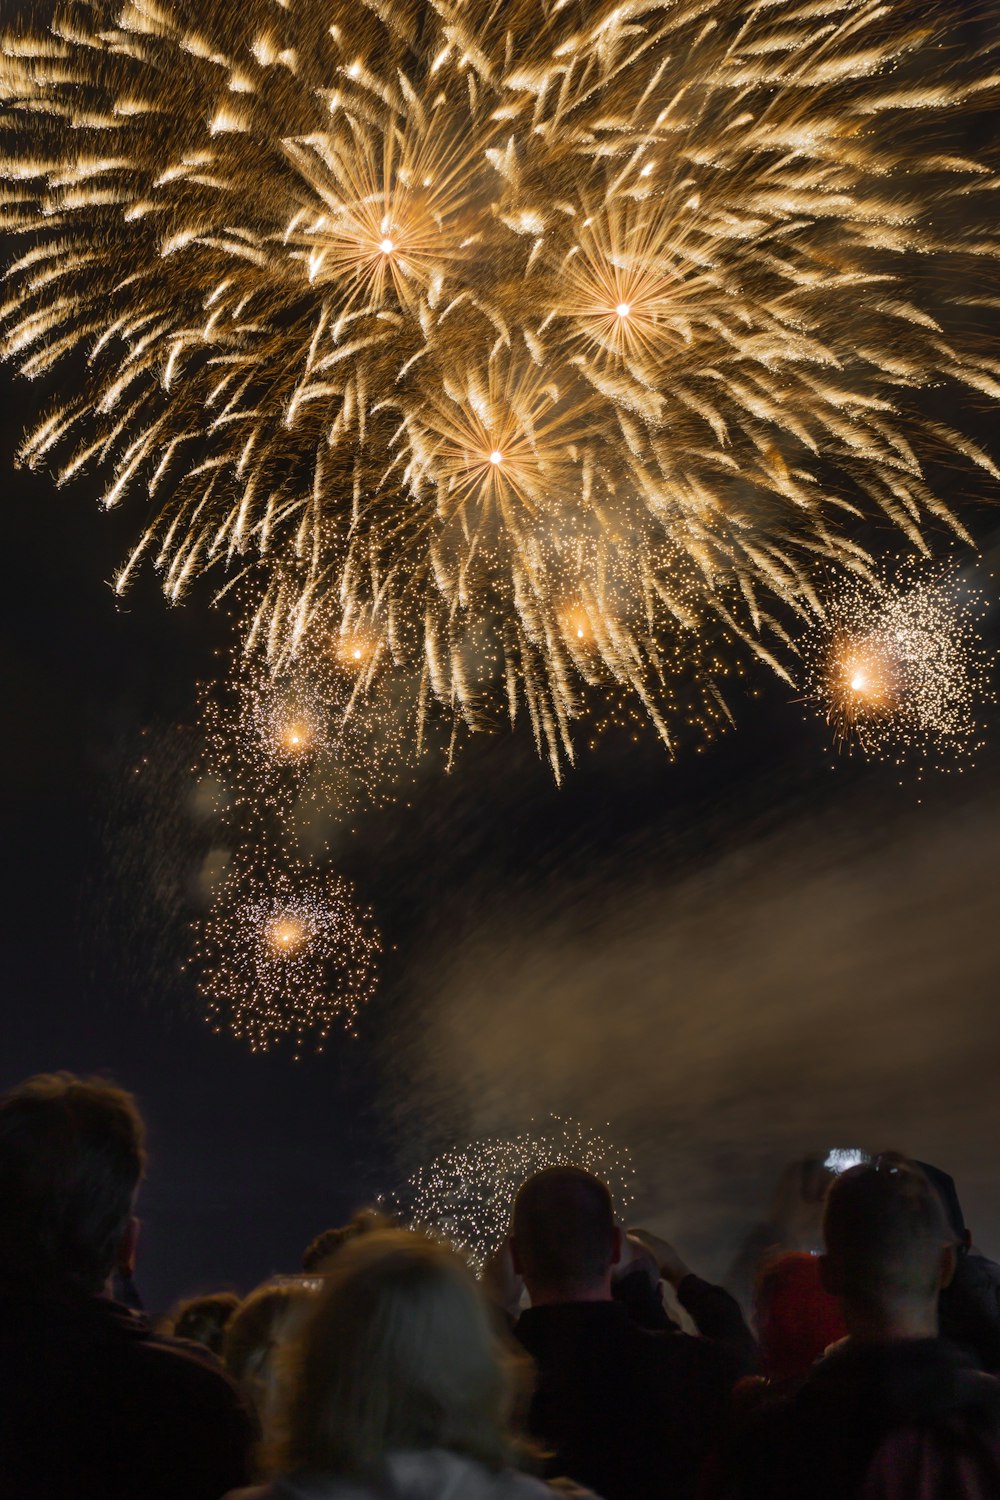 New Year Party Pictures | Download Free Images on Unsplash